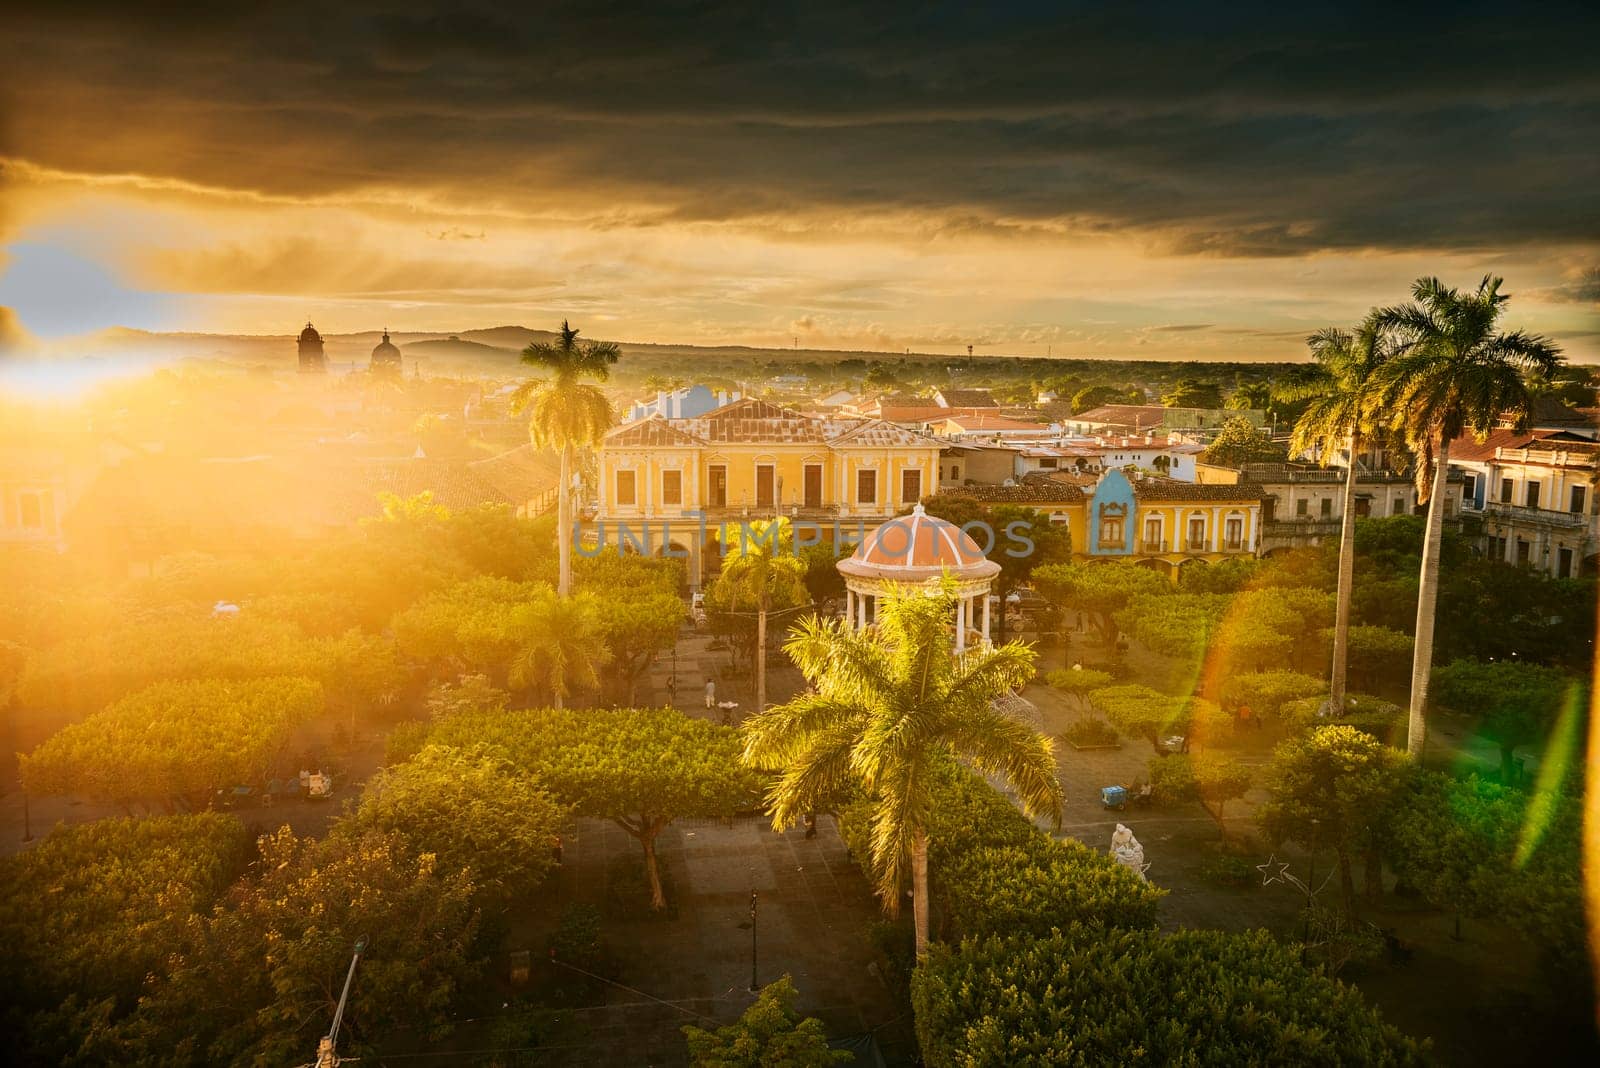 Beautiful view of central park of Granada from the viewpoint. Tourist places in Granada, Nicaragua. View of the central park of Granada at sunset by isaiphoto